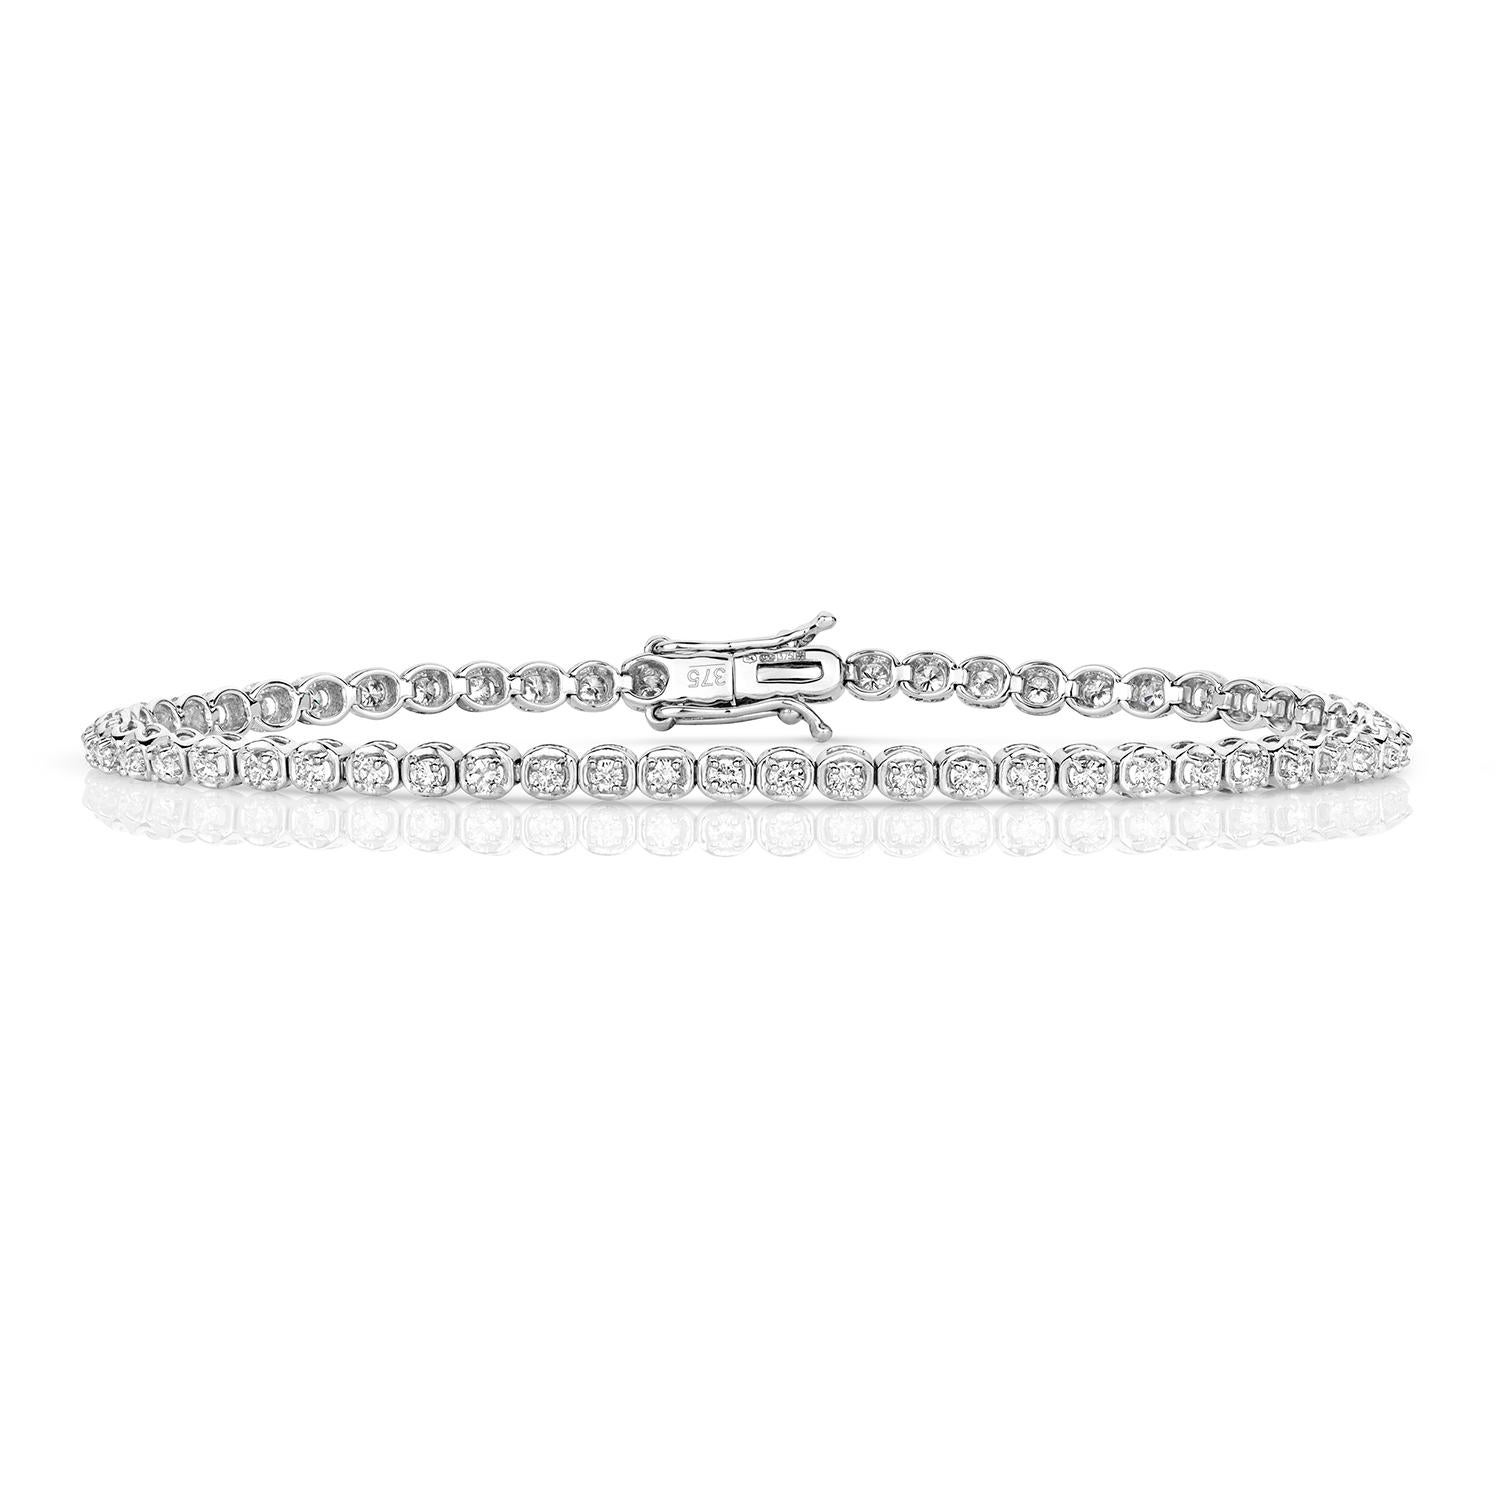 DIAMOND BRACELET

9CT W/G HI I1 1.25CT

Weight: 5.6g

Number Of Stones:58

Total Carates:1.250